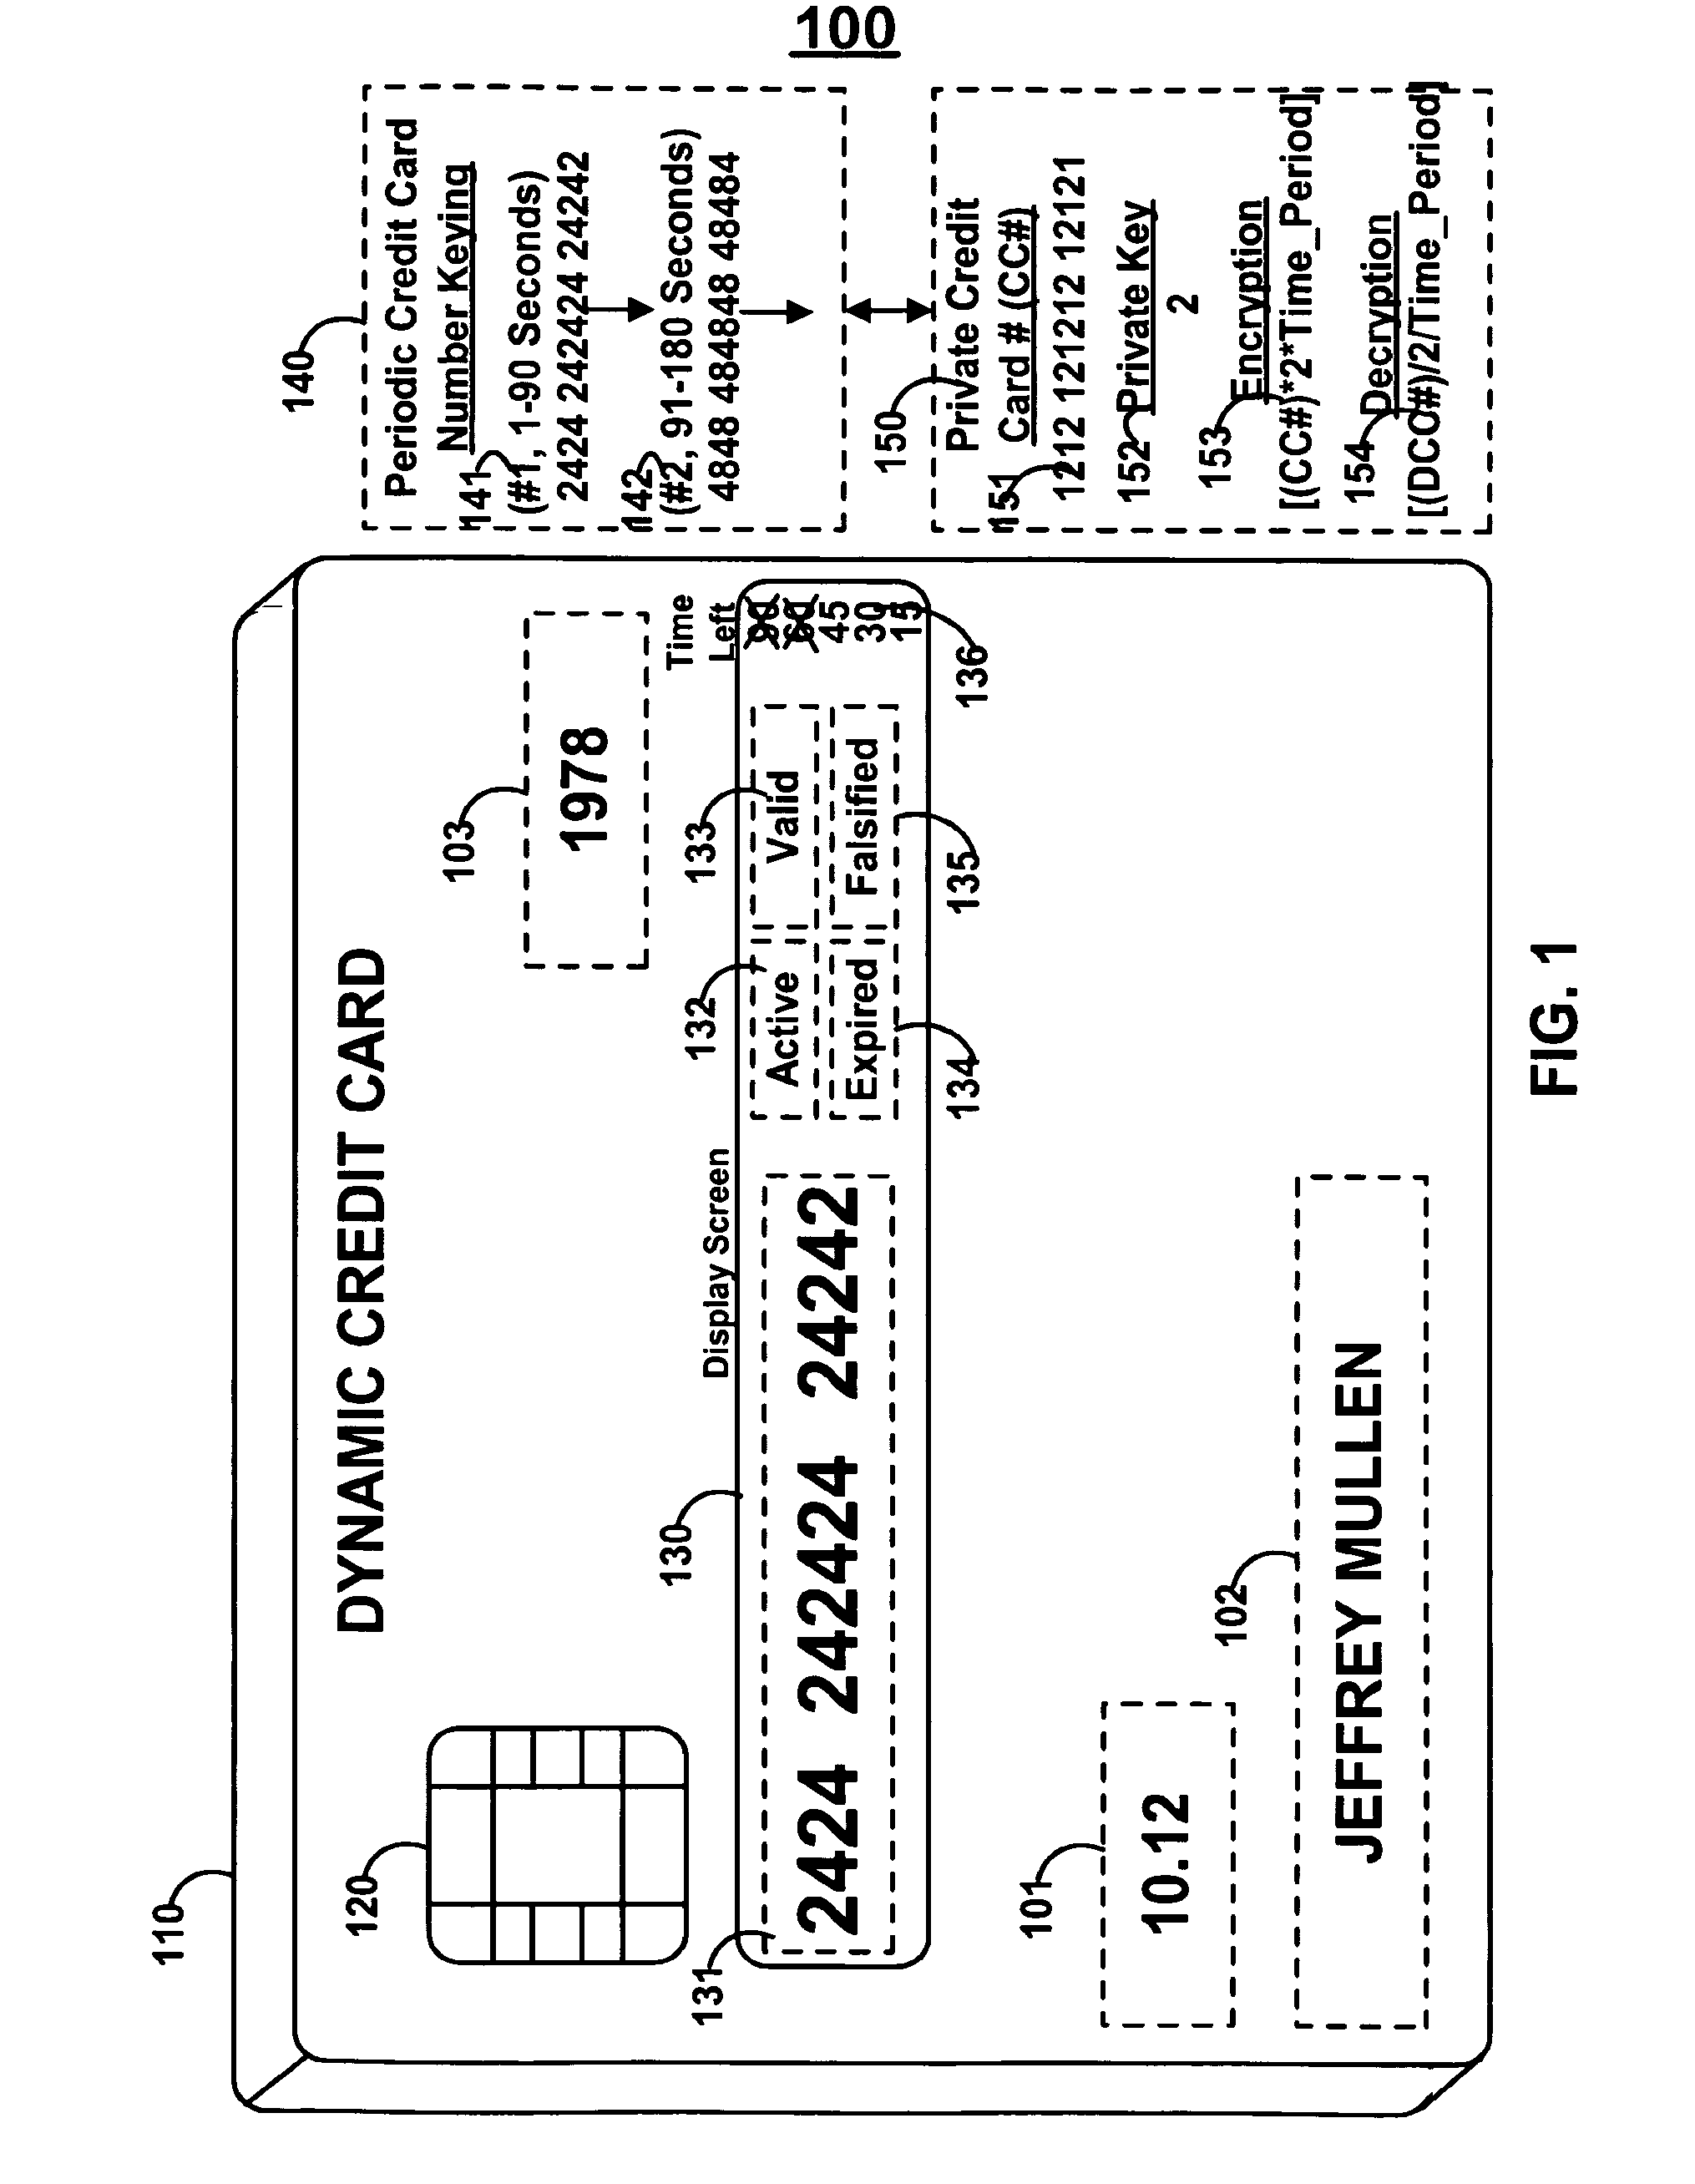 Dynamic credit card with magnetic stripe and embedded encoder and methods for using the same to provide a copy-proof credit card